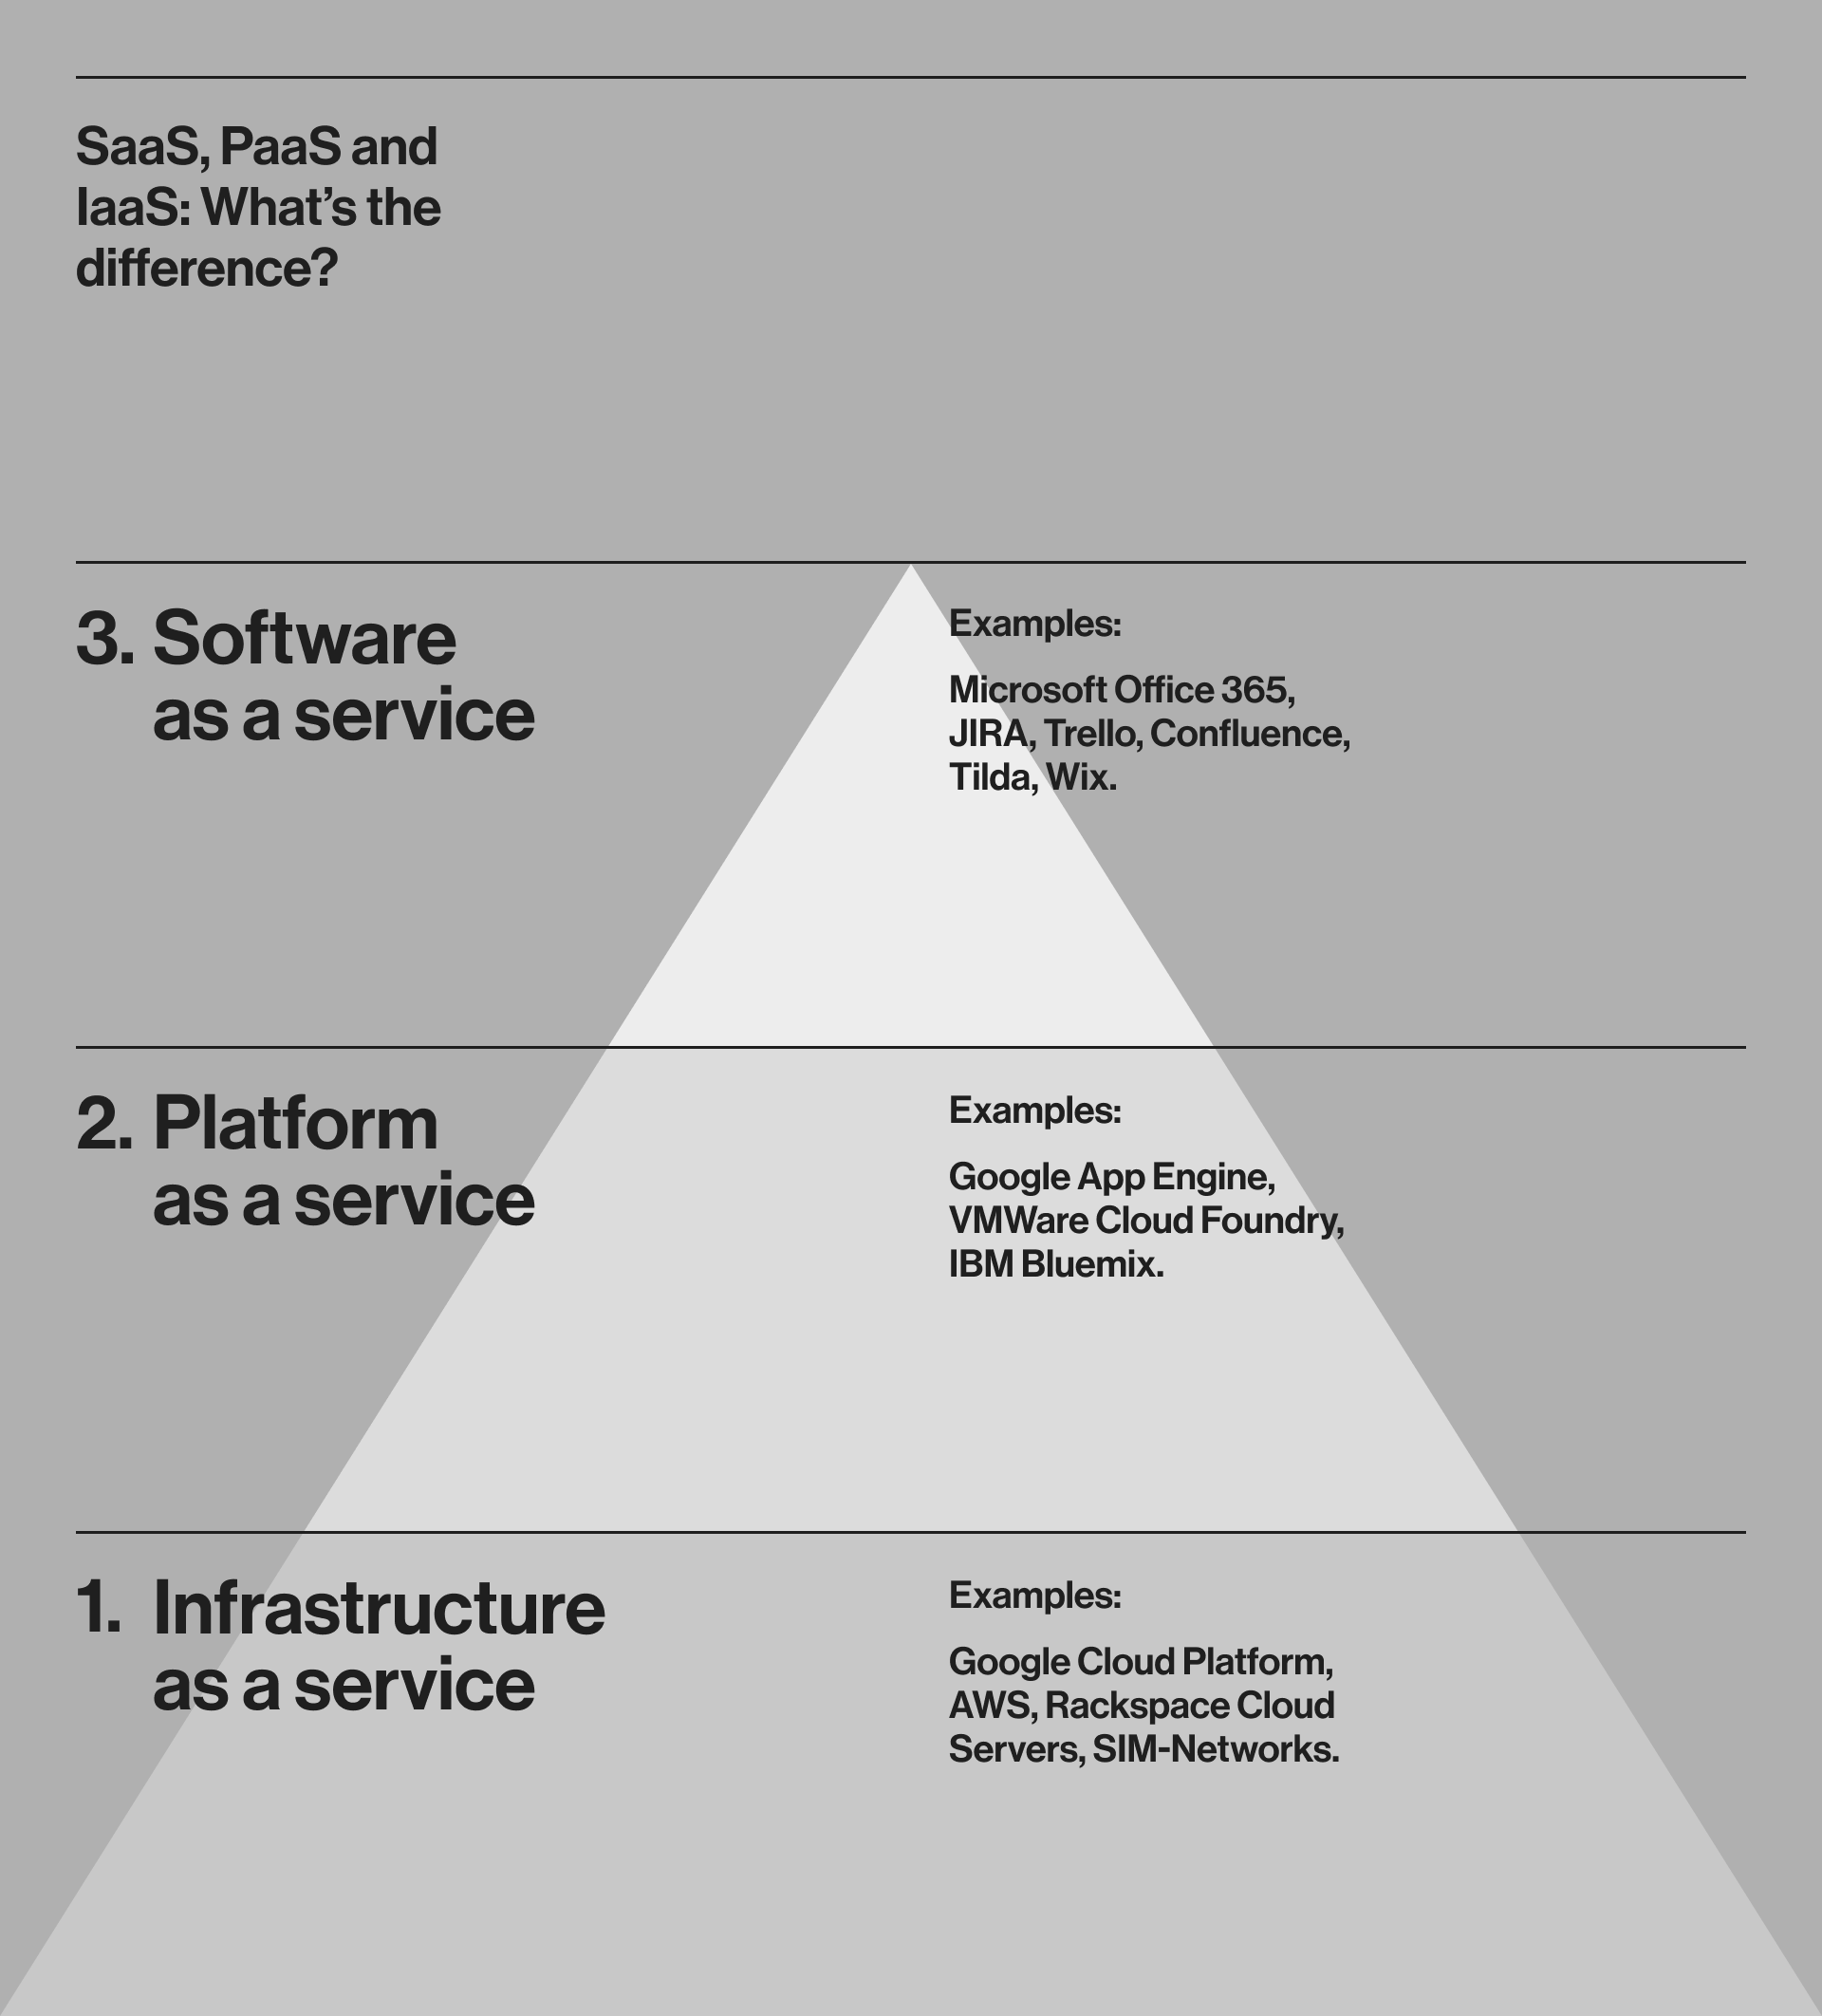 Difference of SaaS, PaaS and IaaS